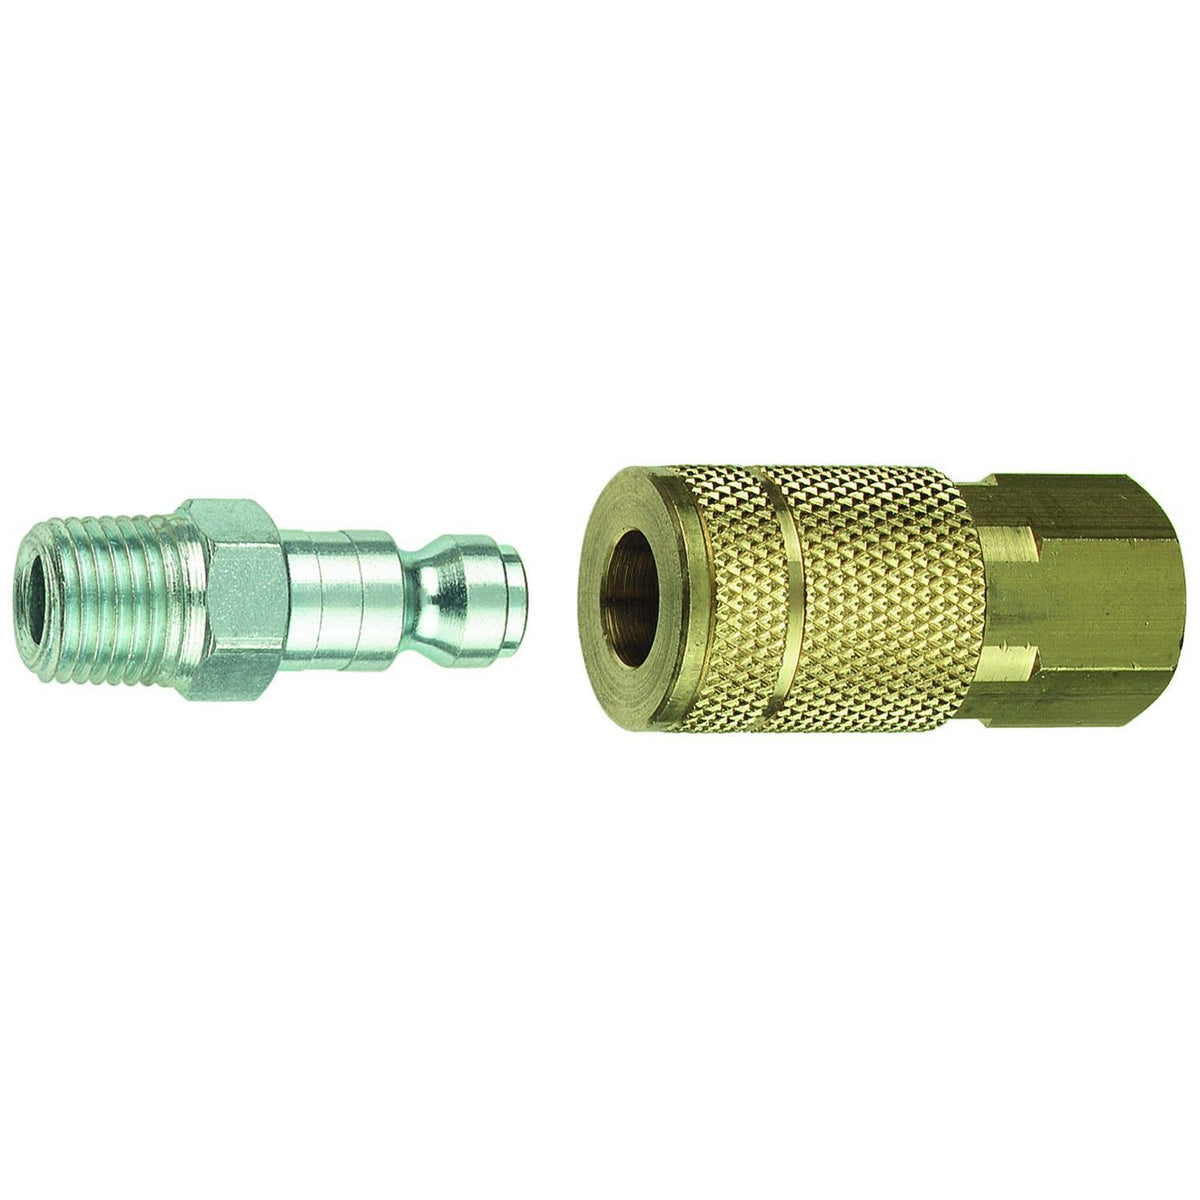 buy air compressors hose couplers at cheap rate in bulk. wholesale & retail professional hand tools store. home décor ideas, maintenance, repair replacement parts